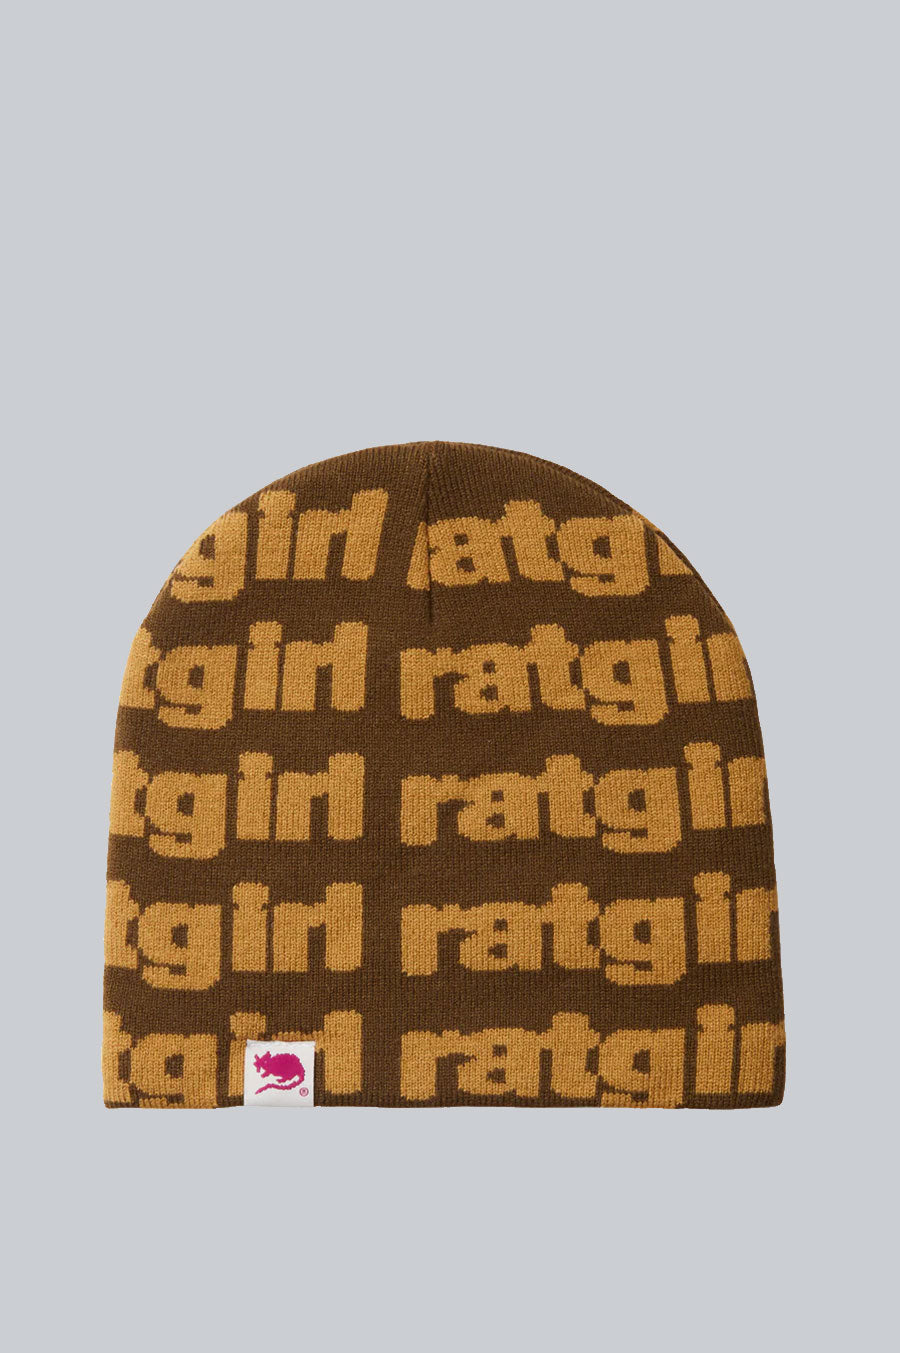 STRAY RATS RATGIRL BEANIE BROWN GOLD